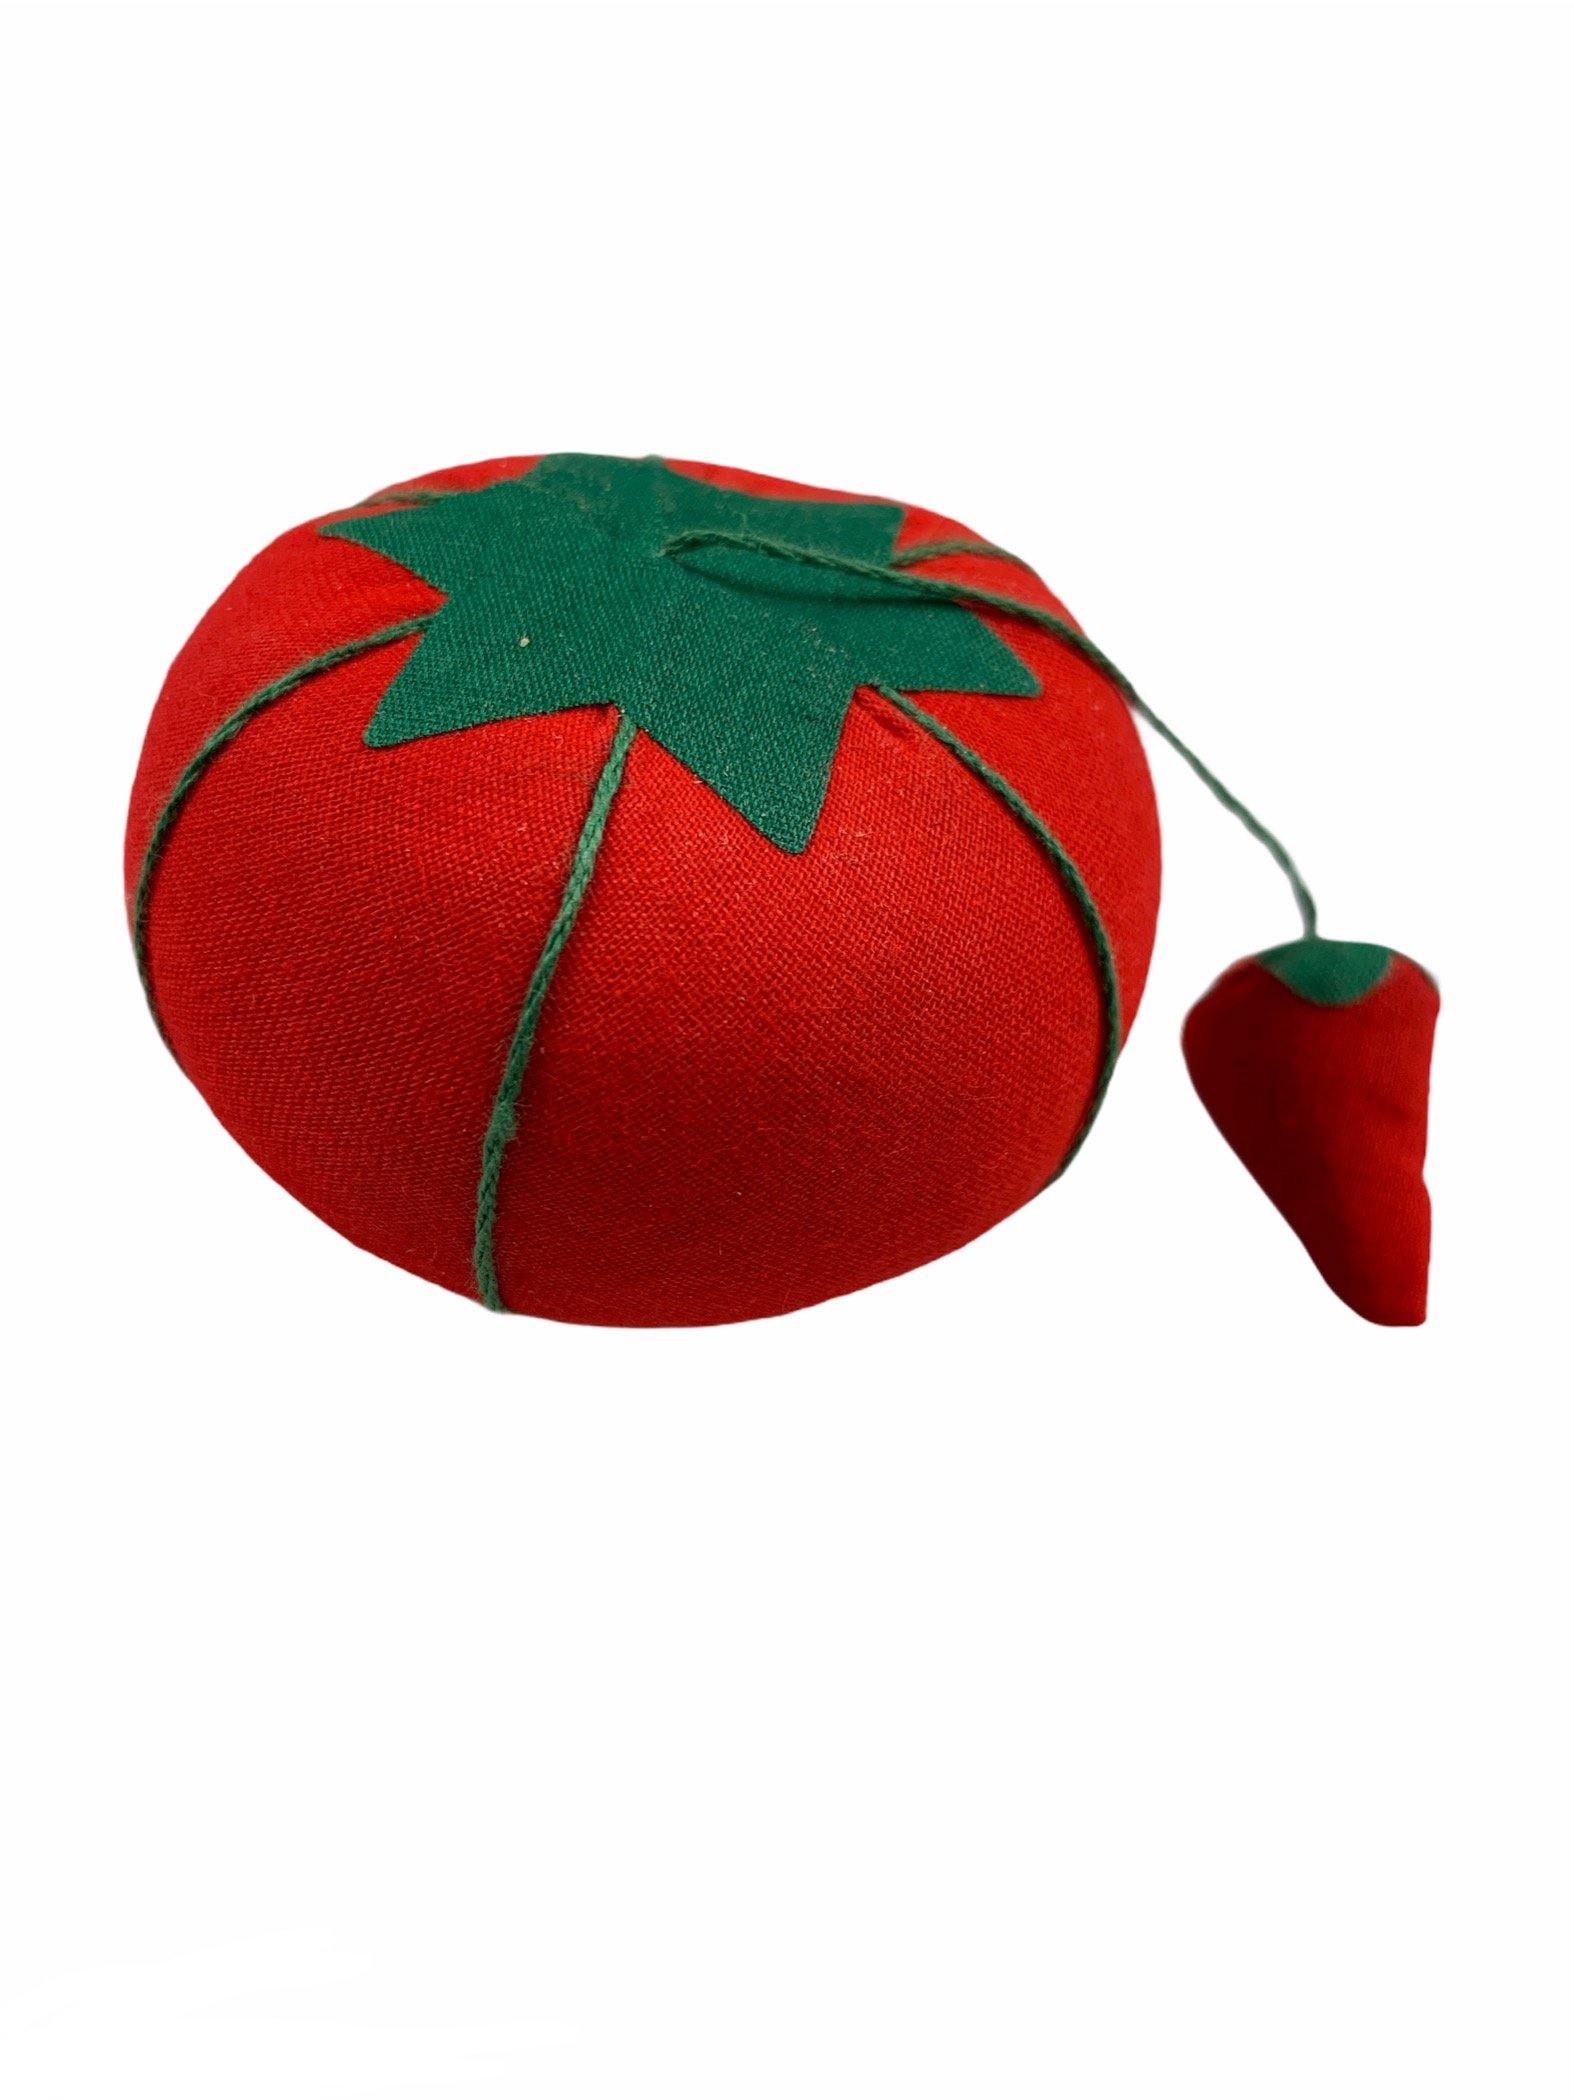 Quilted Tomato Pin Cushion - Tried & True Creative